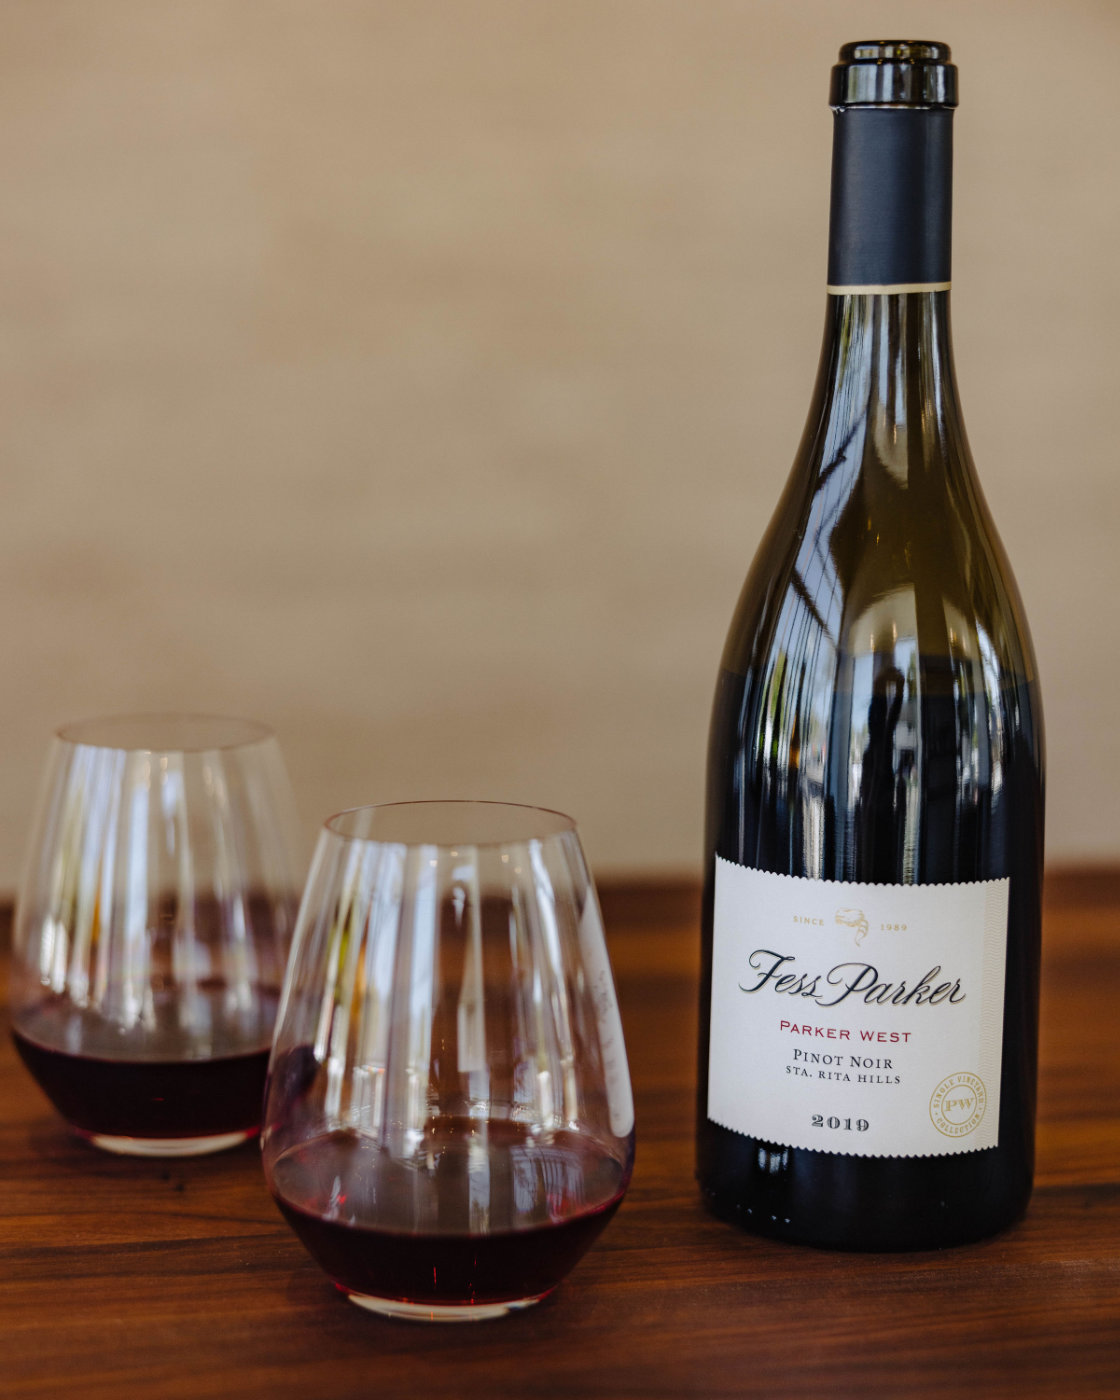 Bottle of 2019 Parker West Pinot Noir poured into two wine glasses